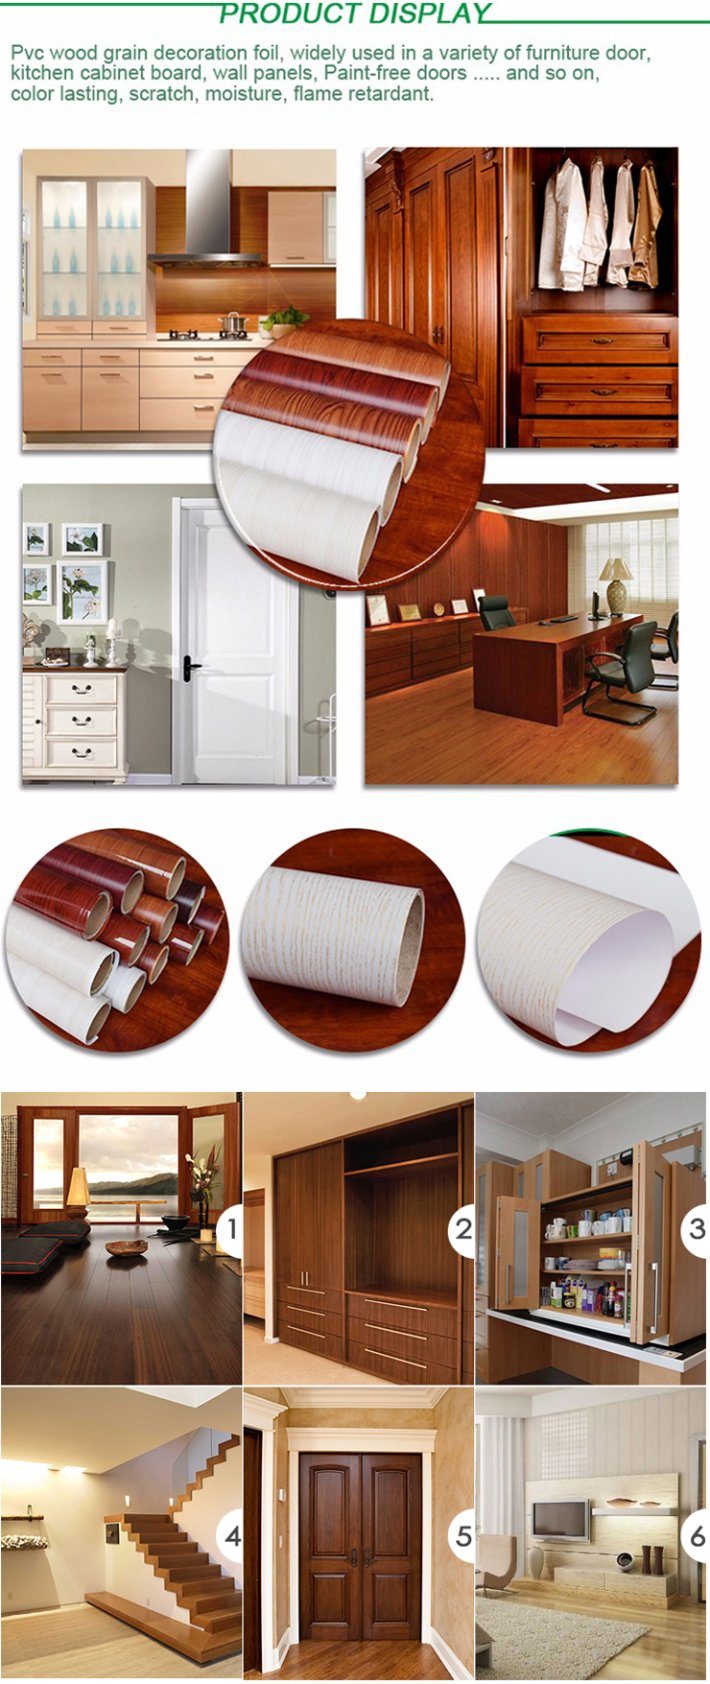 Laminating/Lamination/Lamination Adhesive PVC Wrapping/Covering Film for Furniture/Table/Steel Door